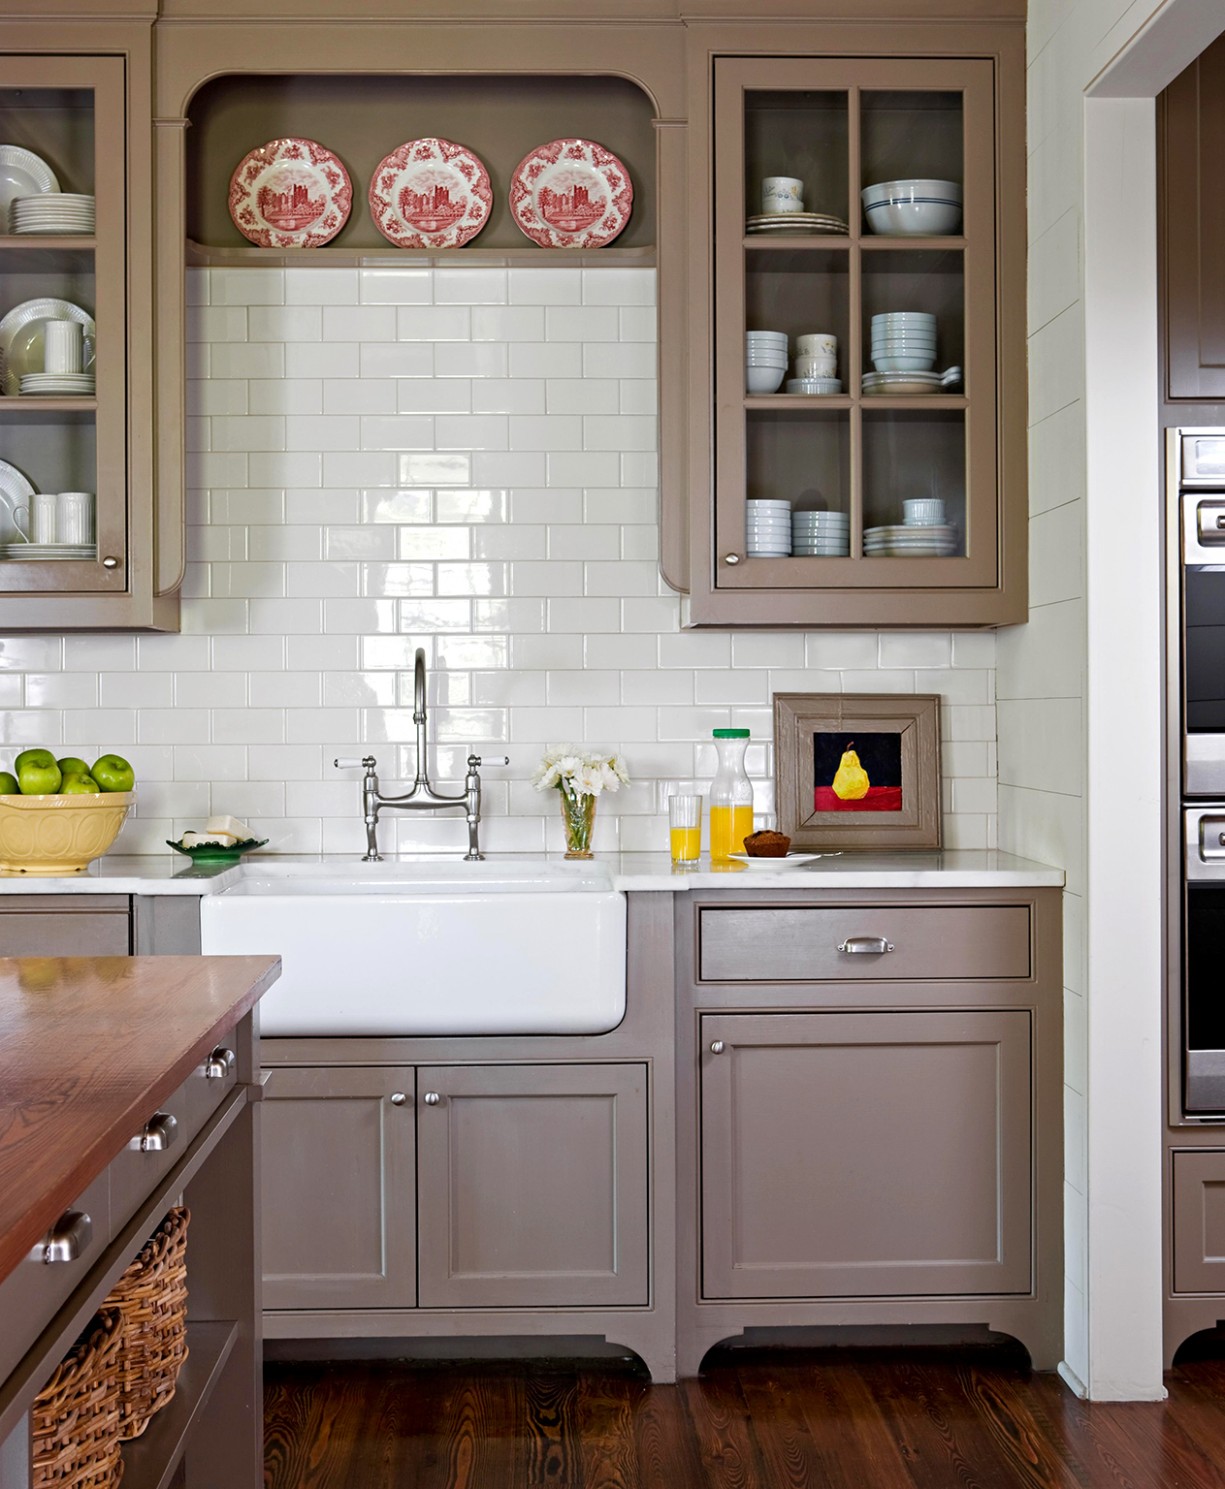 5 Winning Kitchen Color Schemes for a Look You